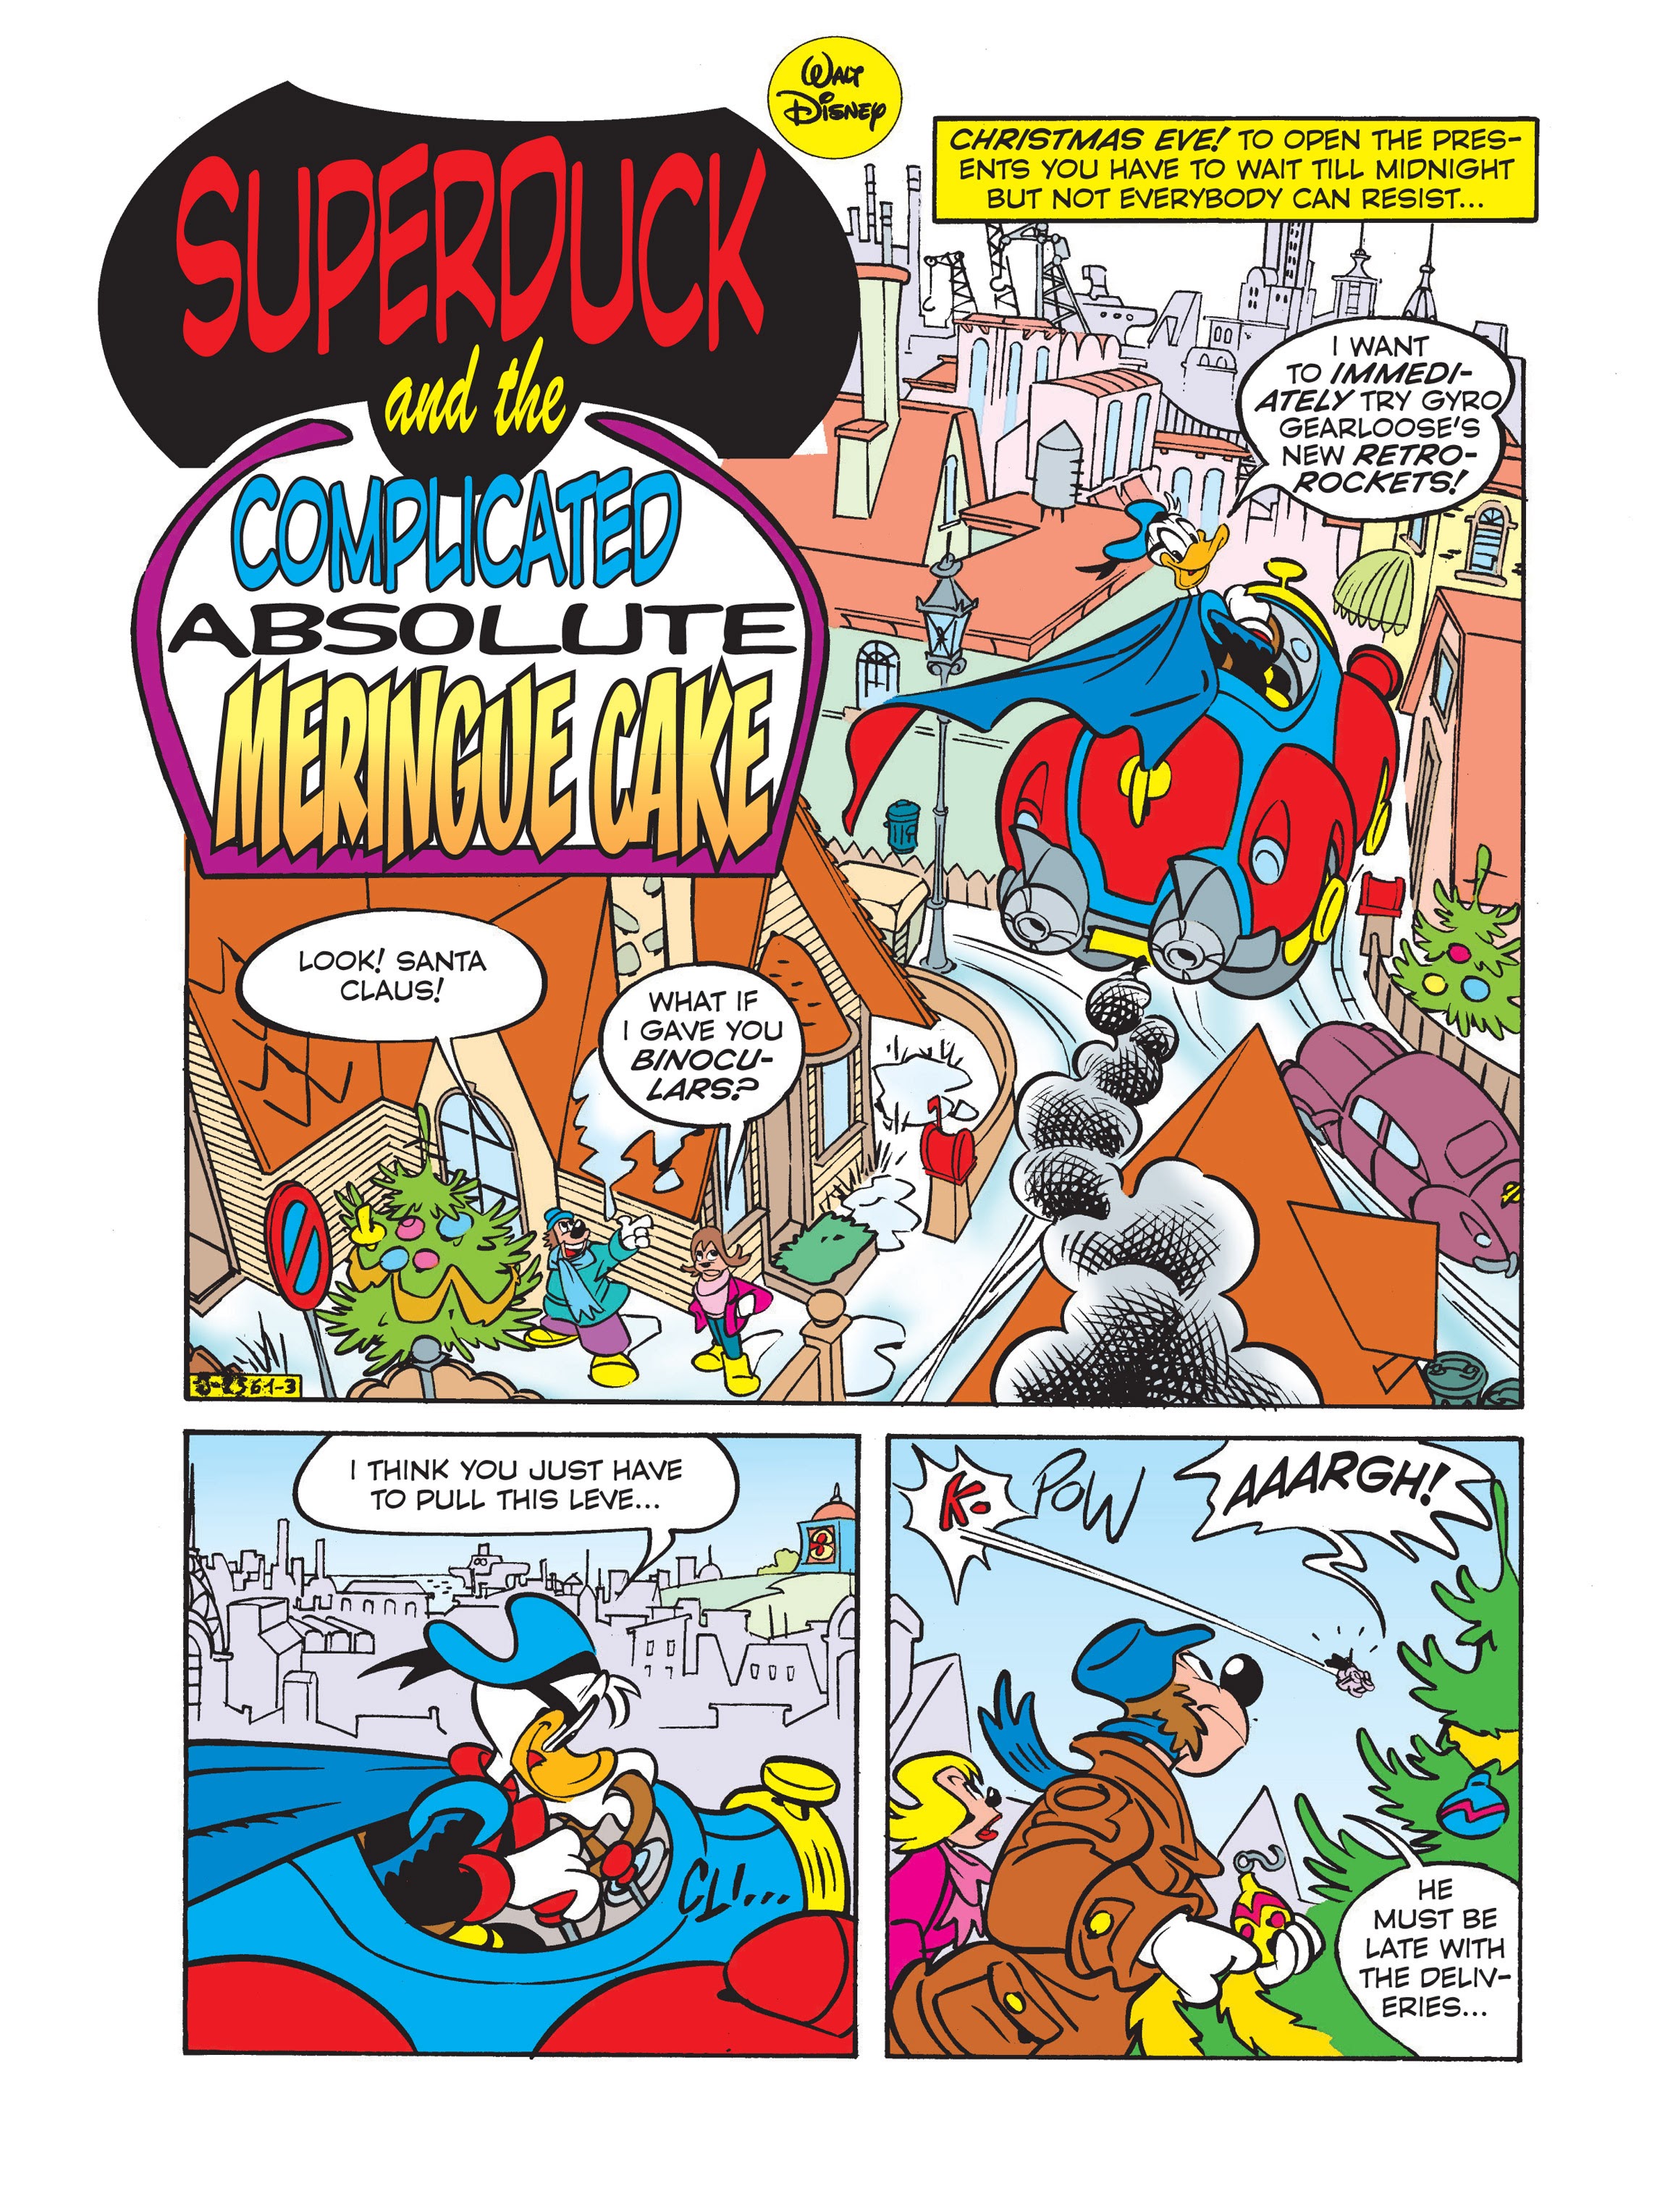 Read online Superduck and the Complicated Absolute Meringue Cake comic -  Issue # Full - 2